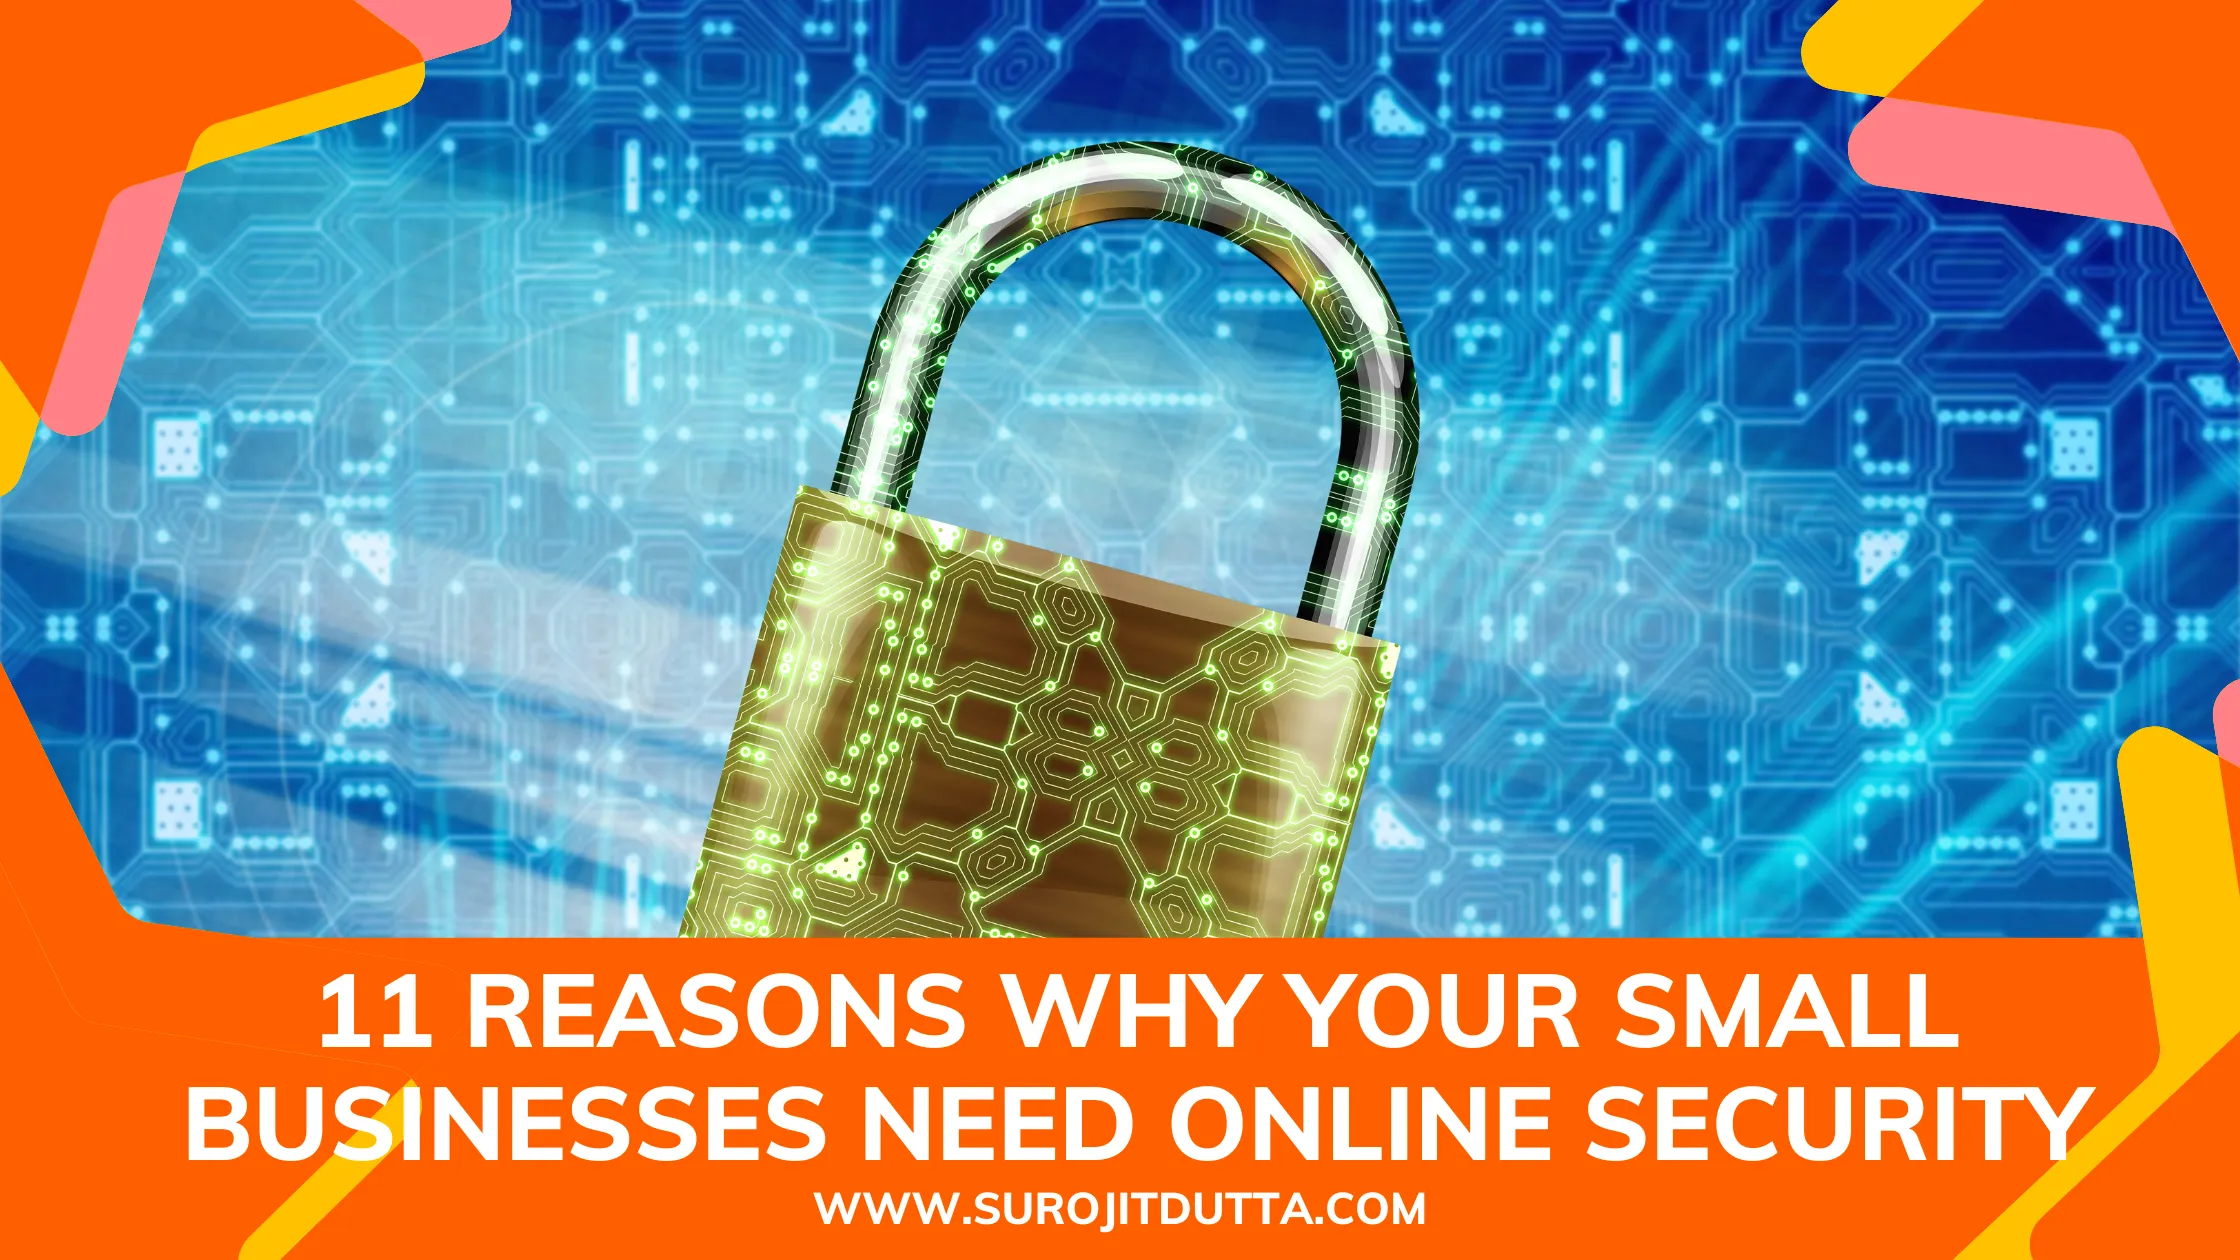 11 Reasons Why Your Small Businesses Need Online Security